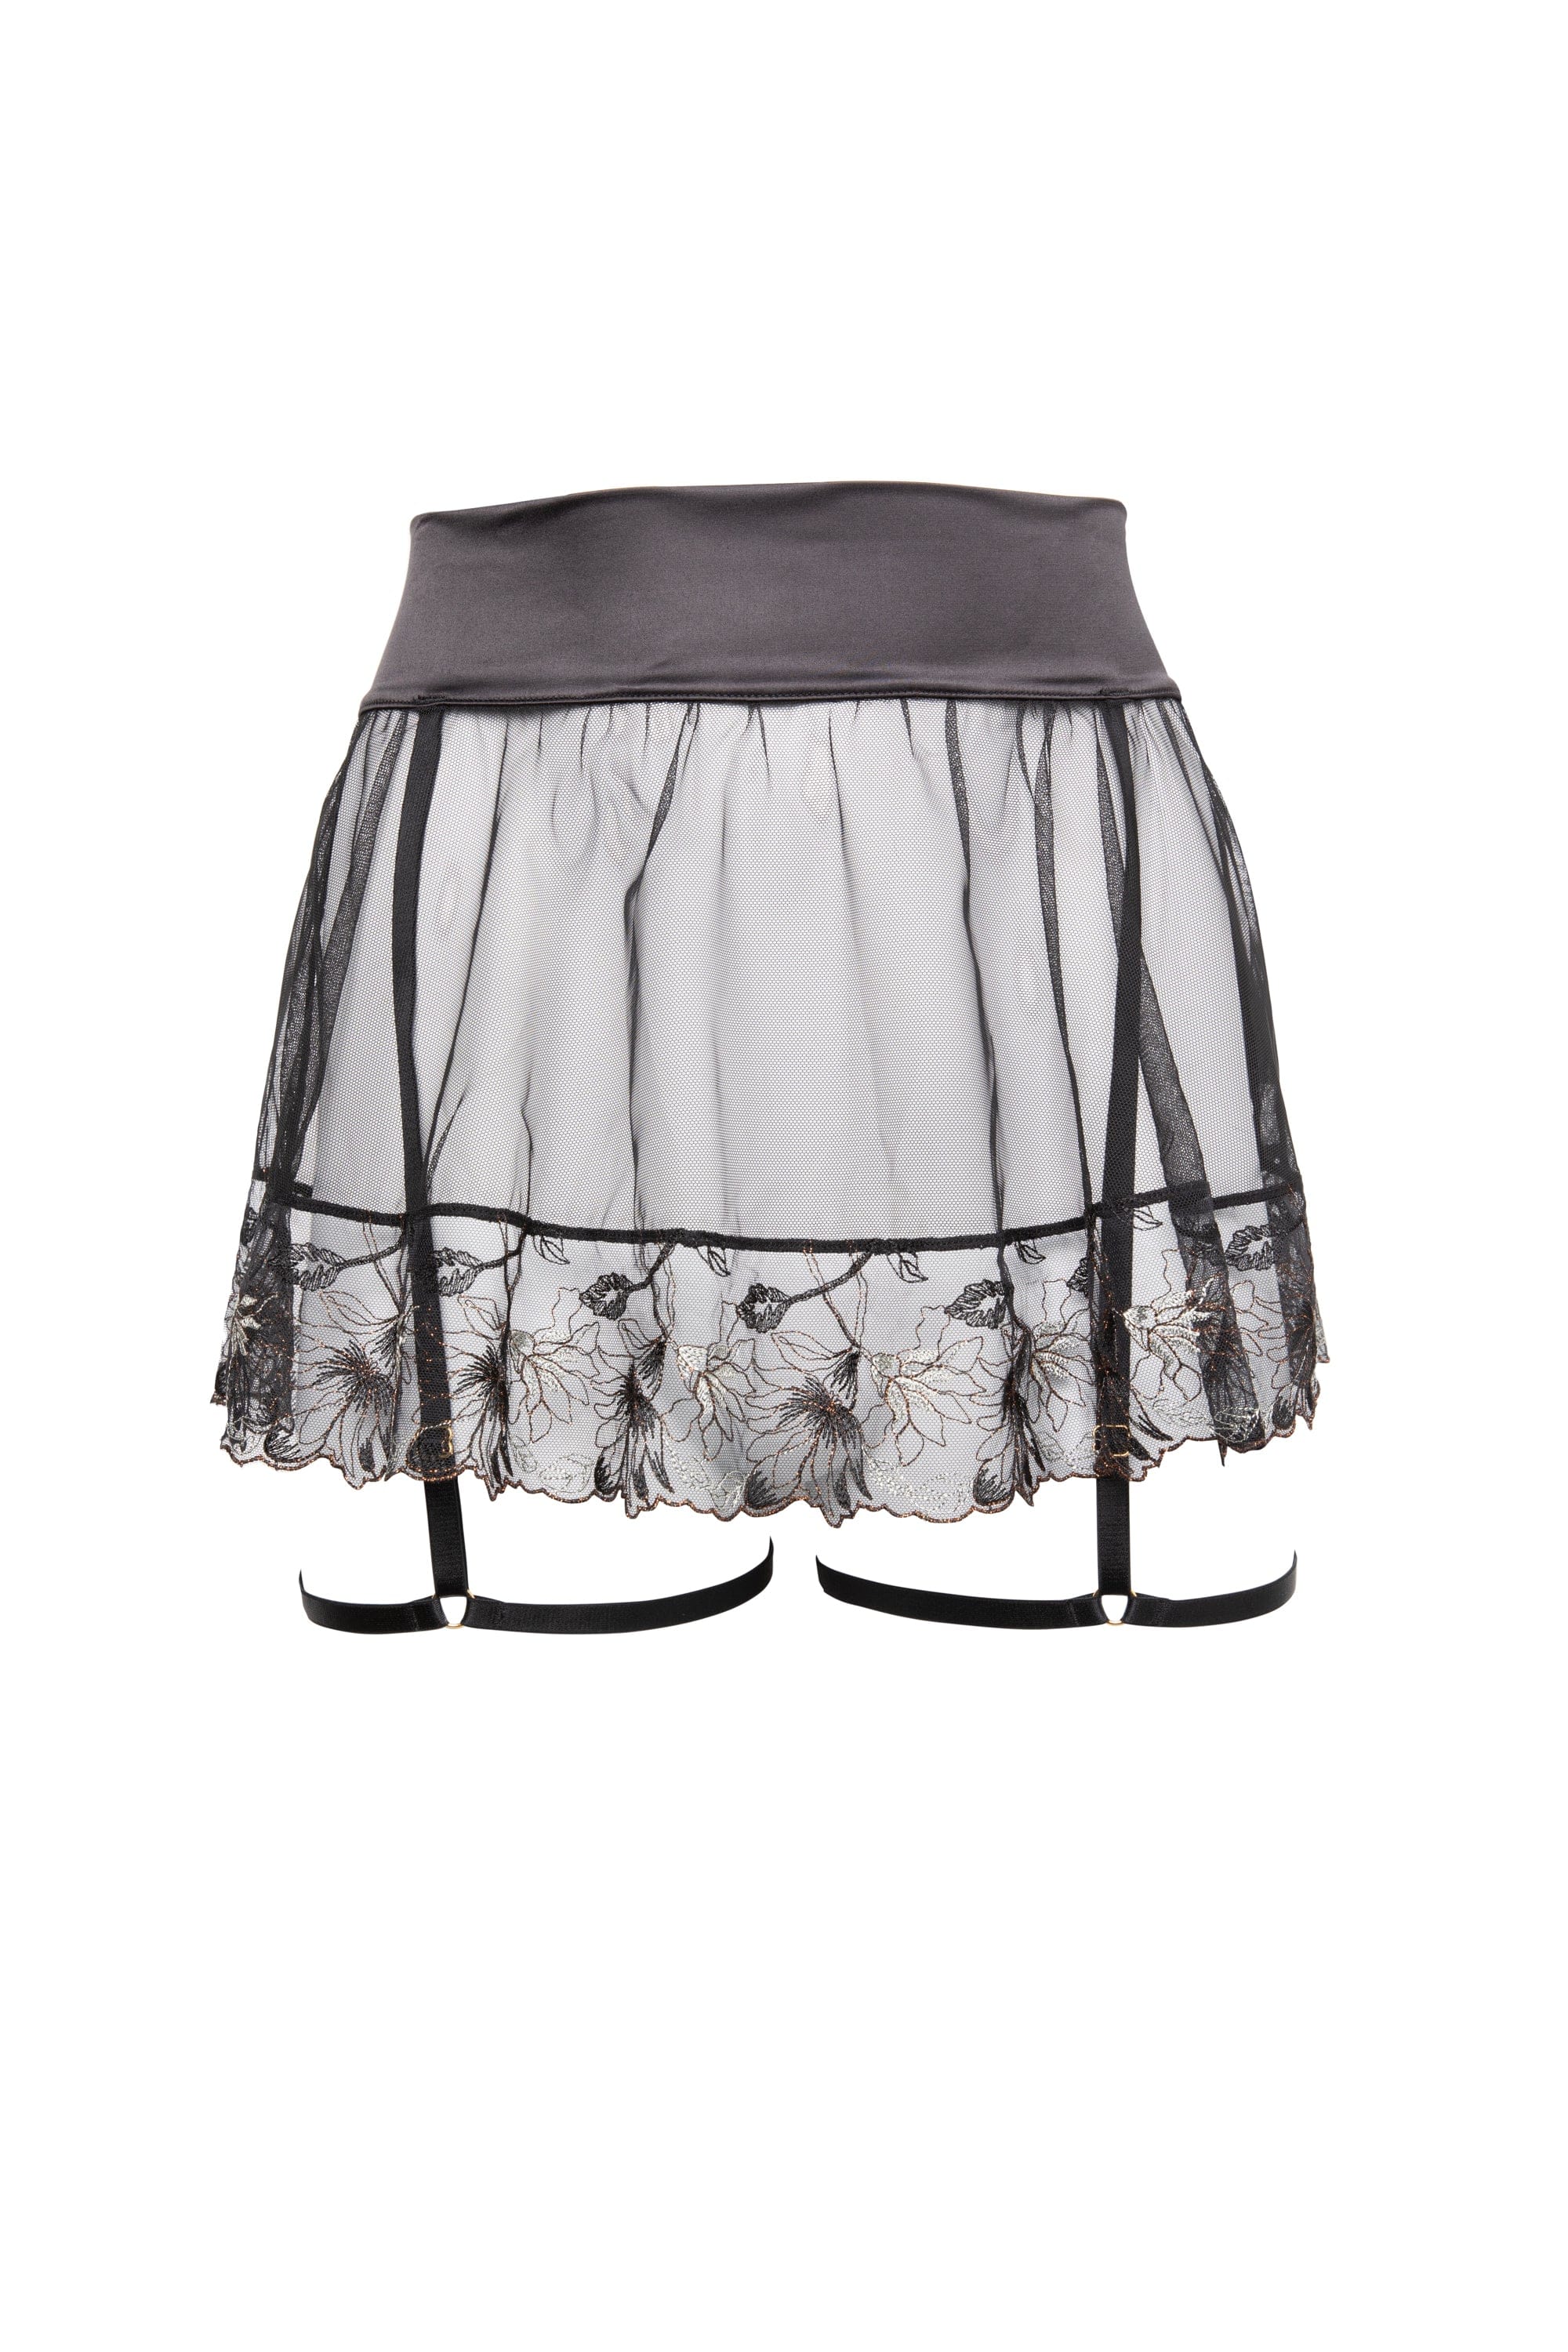 Aria Black and Gold Lace Suspender Skirt